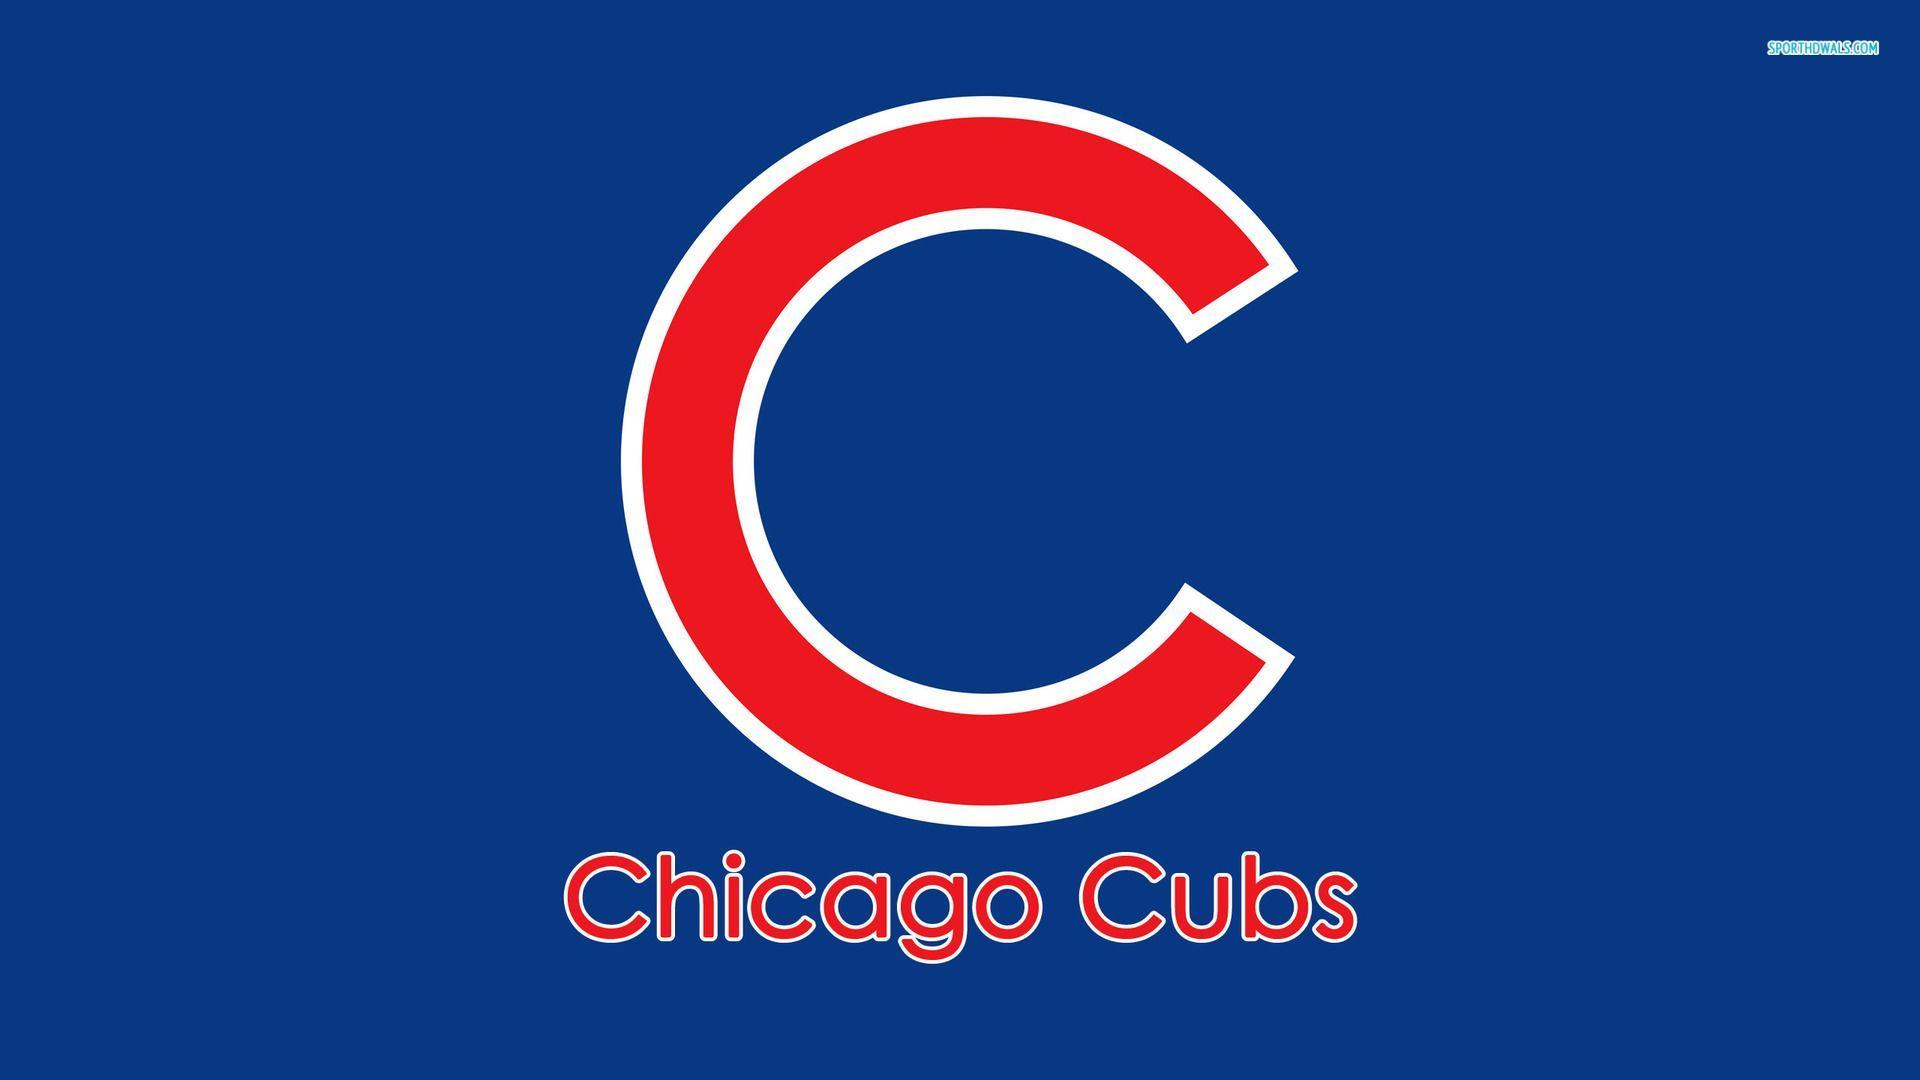 Free Chicago Cubs wallpaper. Chicago Cubs wallpaper